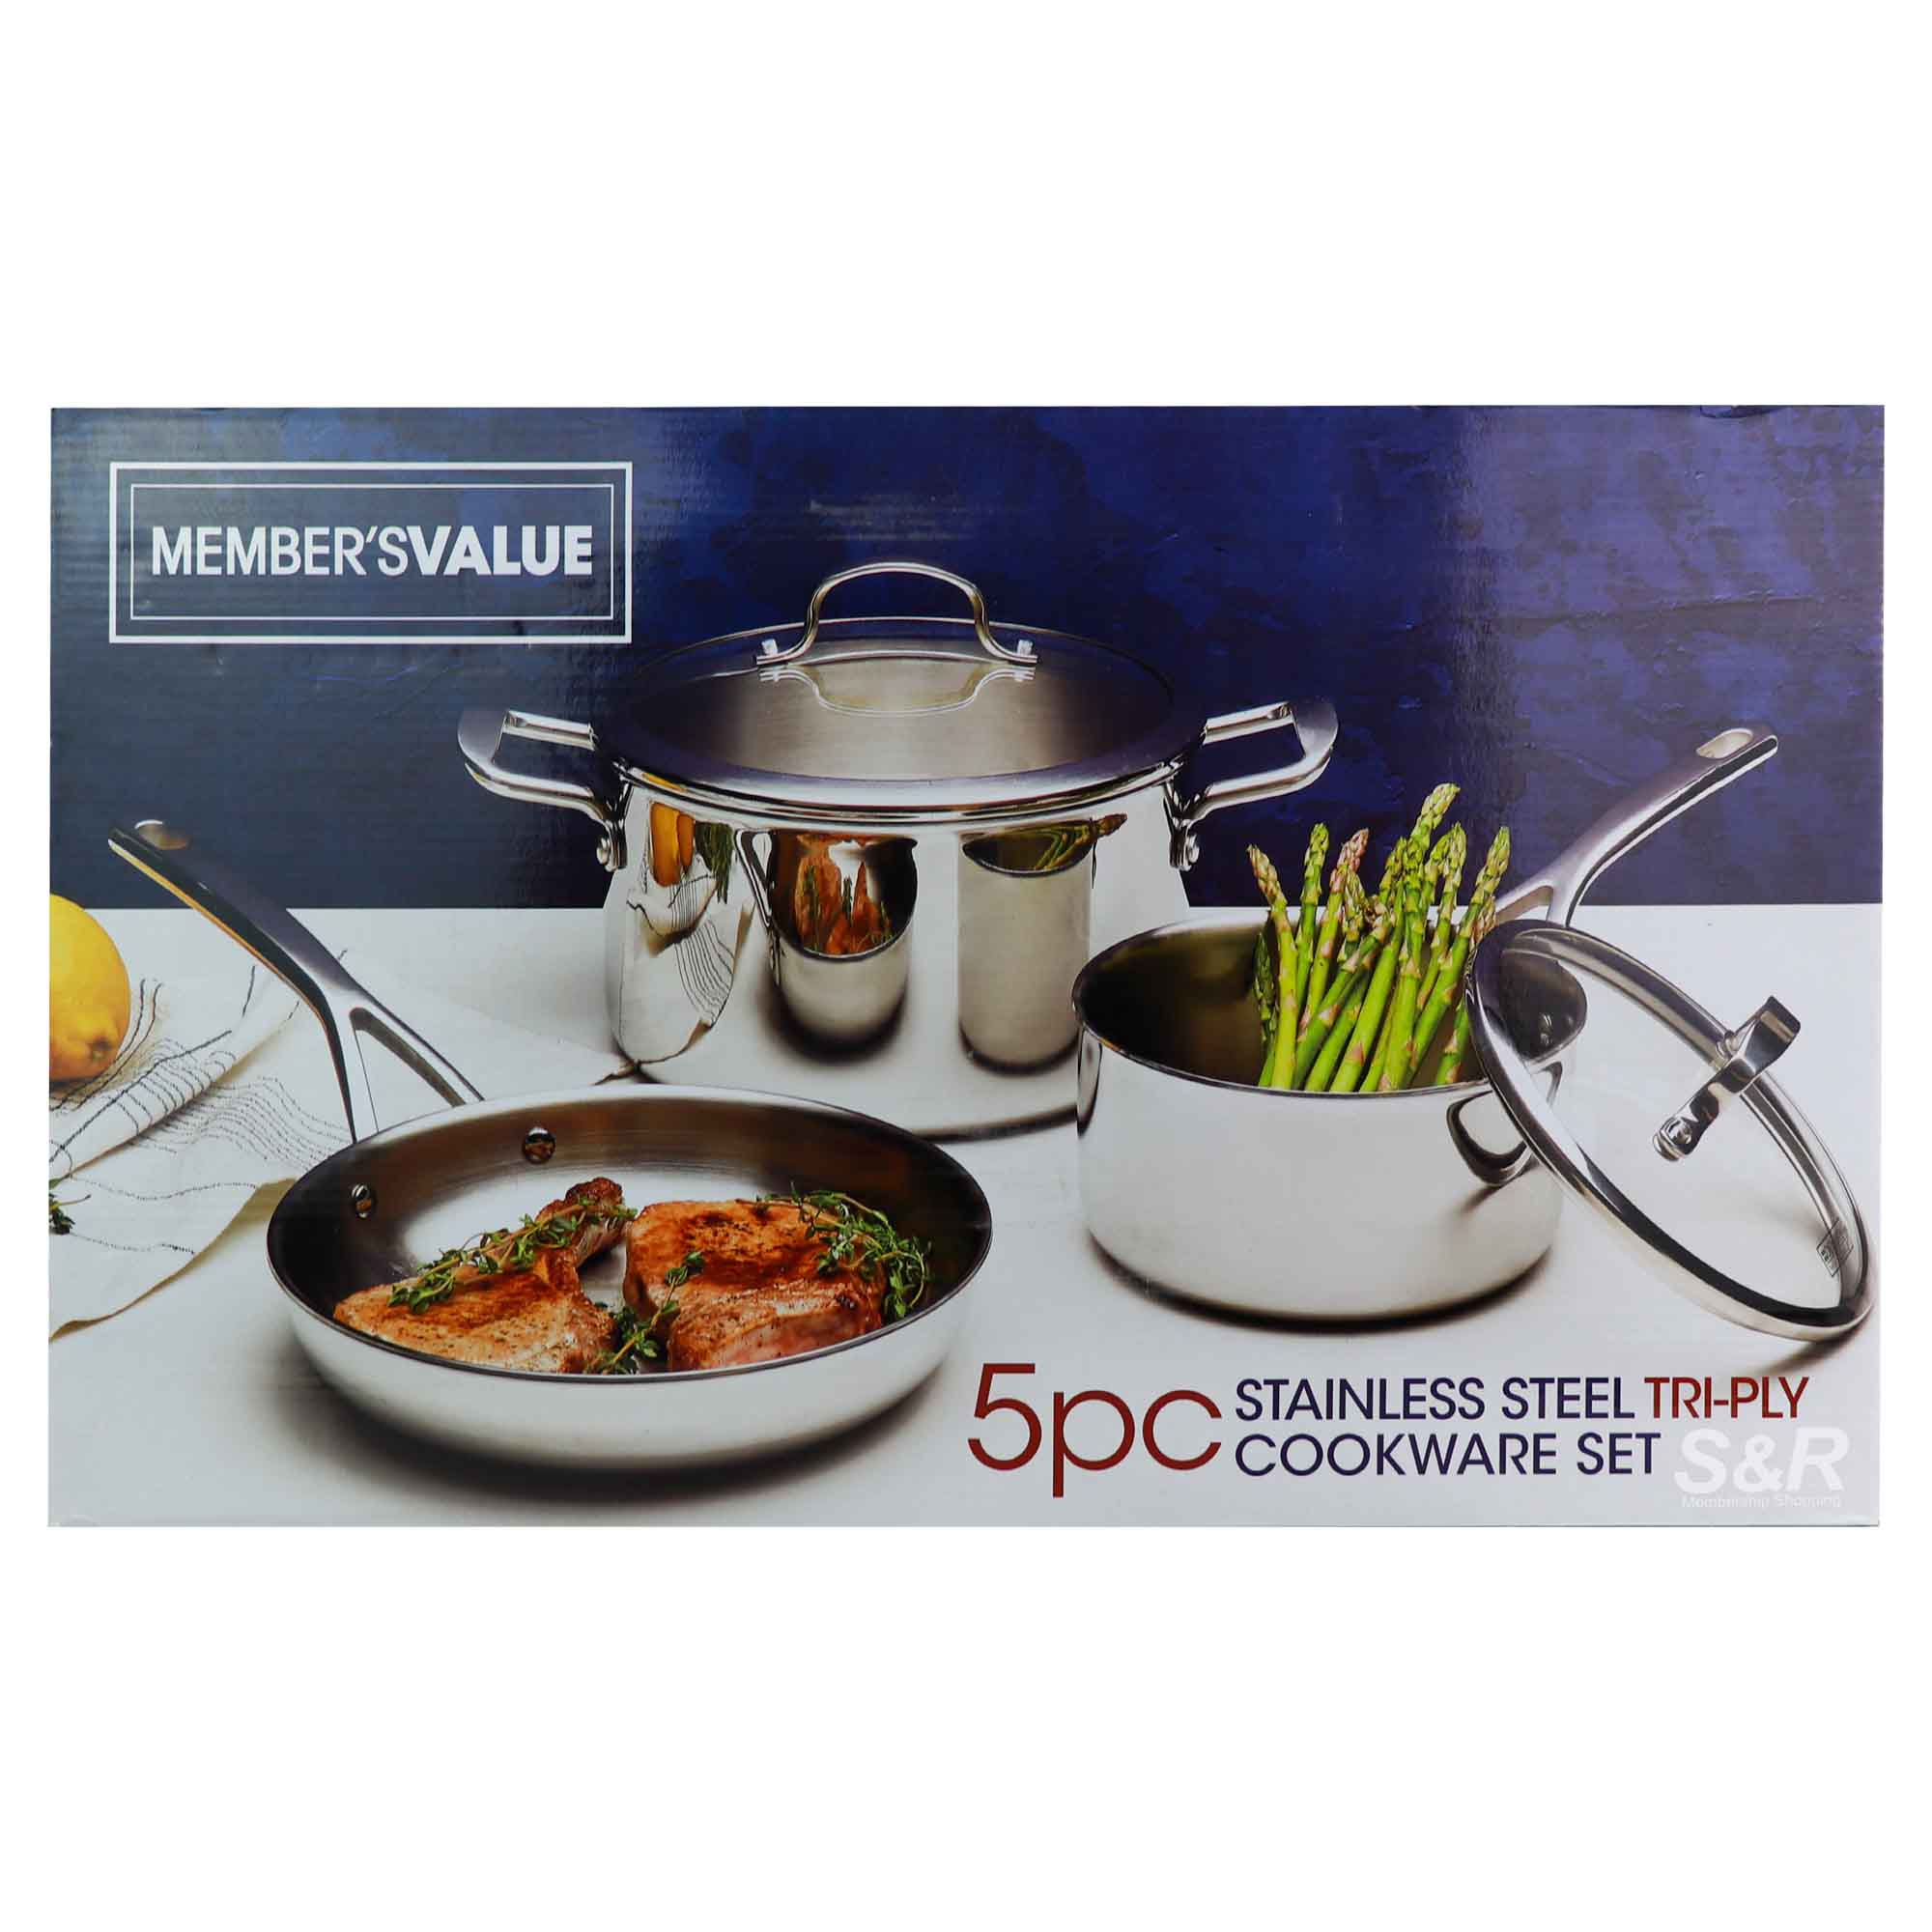 Member's Value Stainless Steel Tri-Ply Cookware Set 5pcs